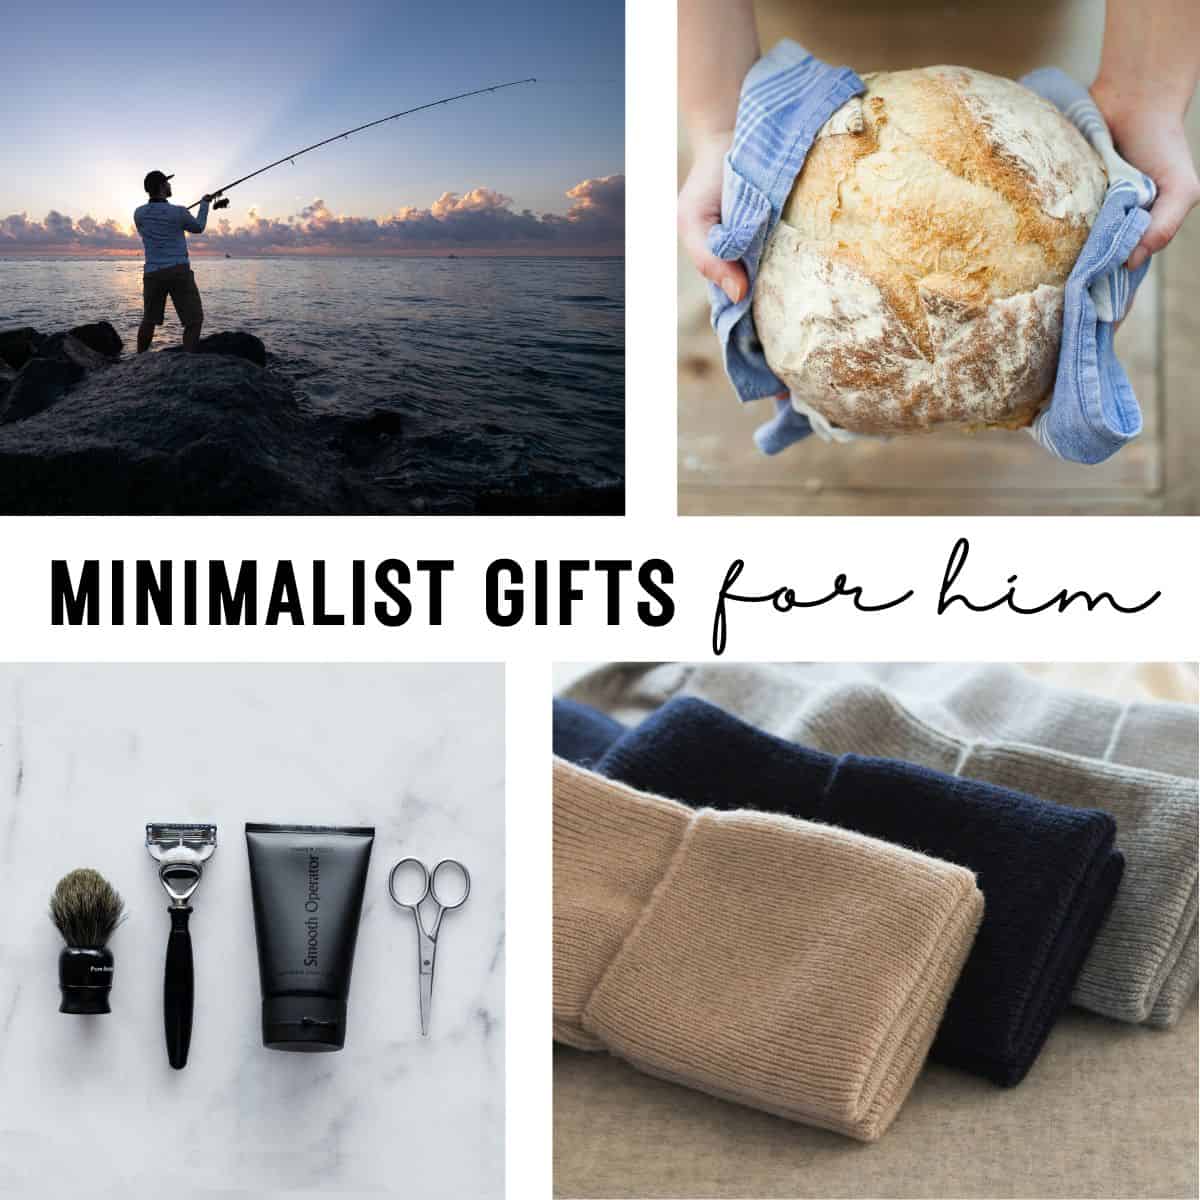 text: minimalist gifts for him and photos of socks, shaving set, homemade bread and man fishing